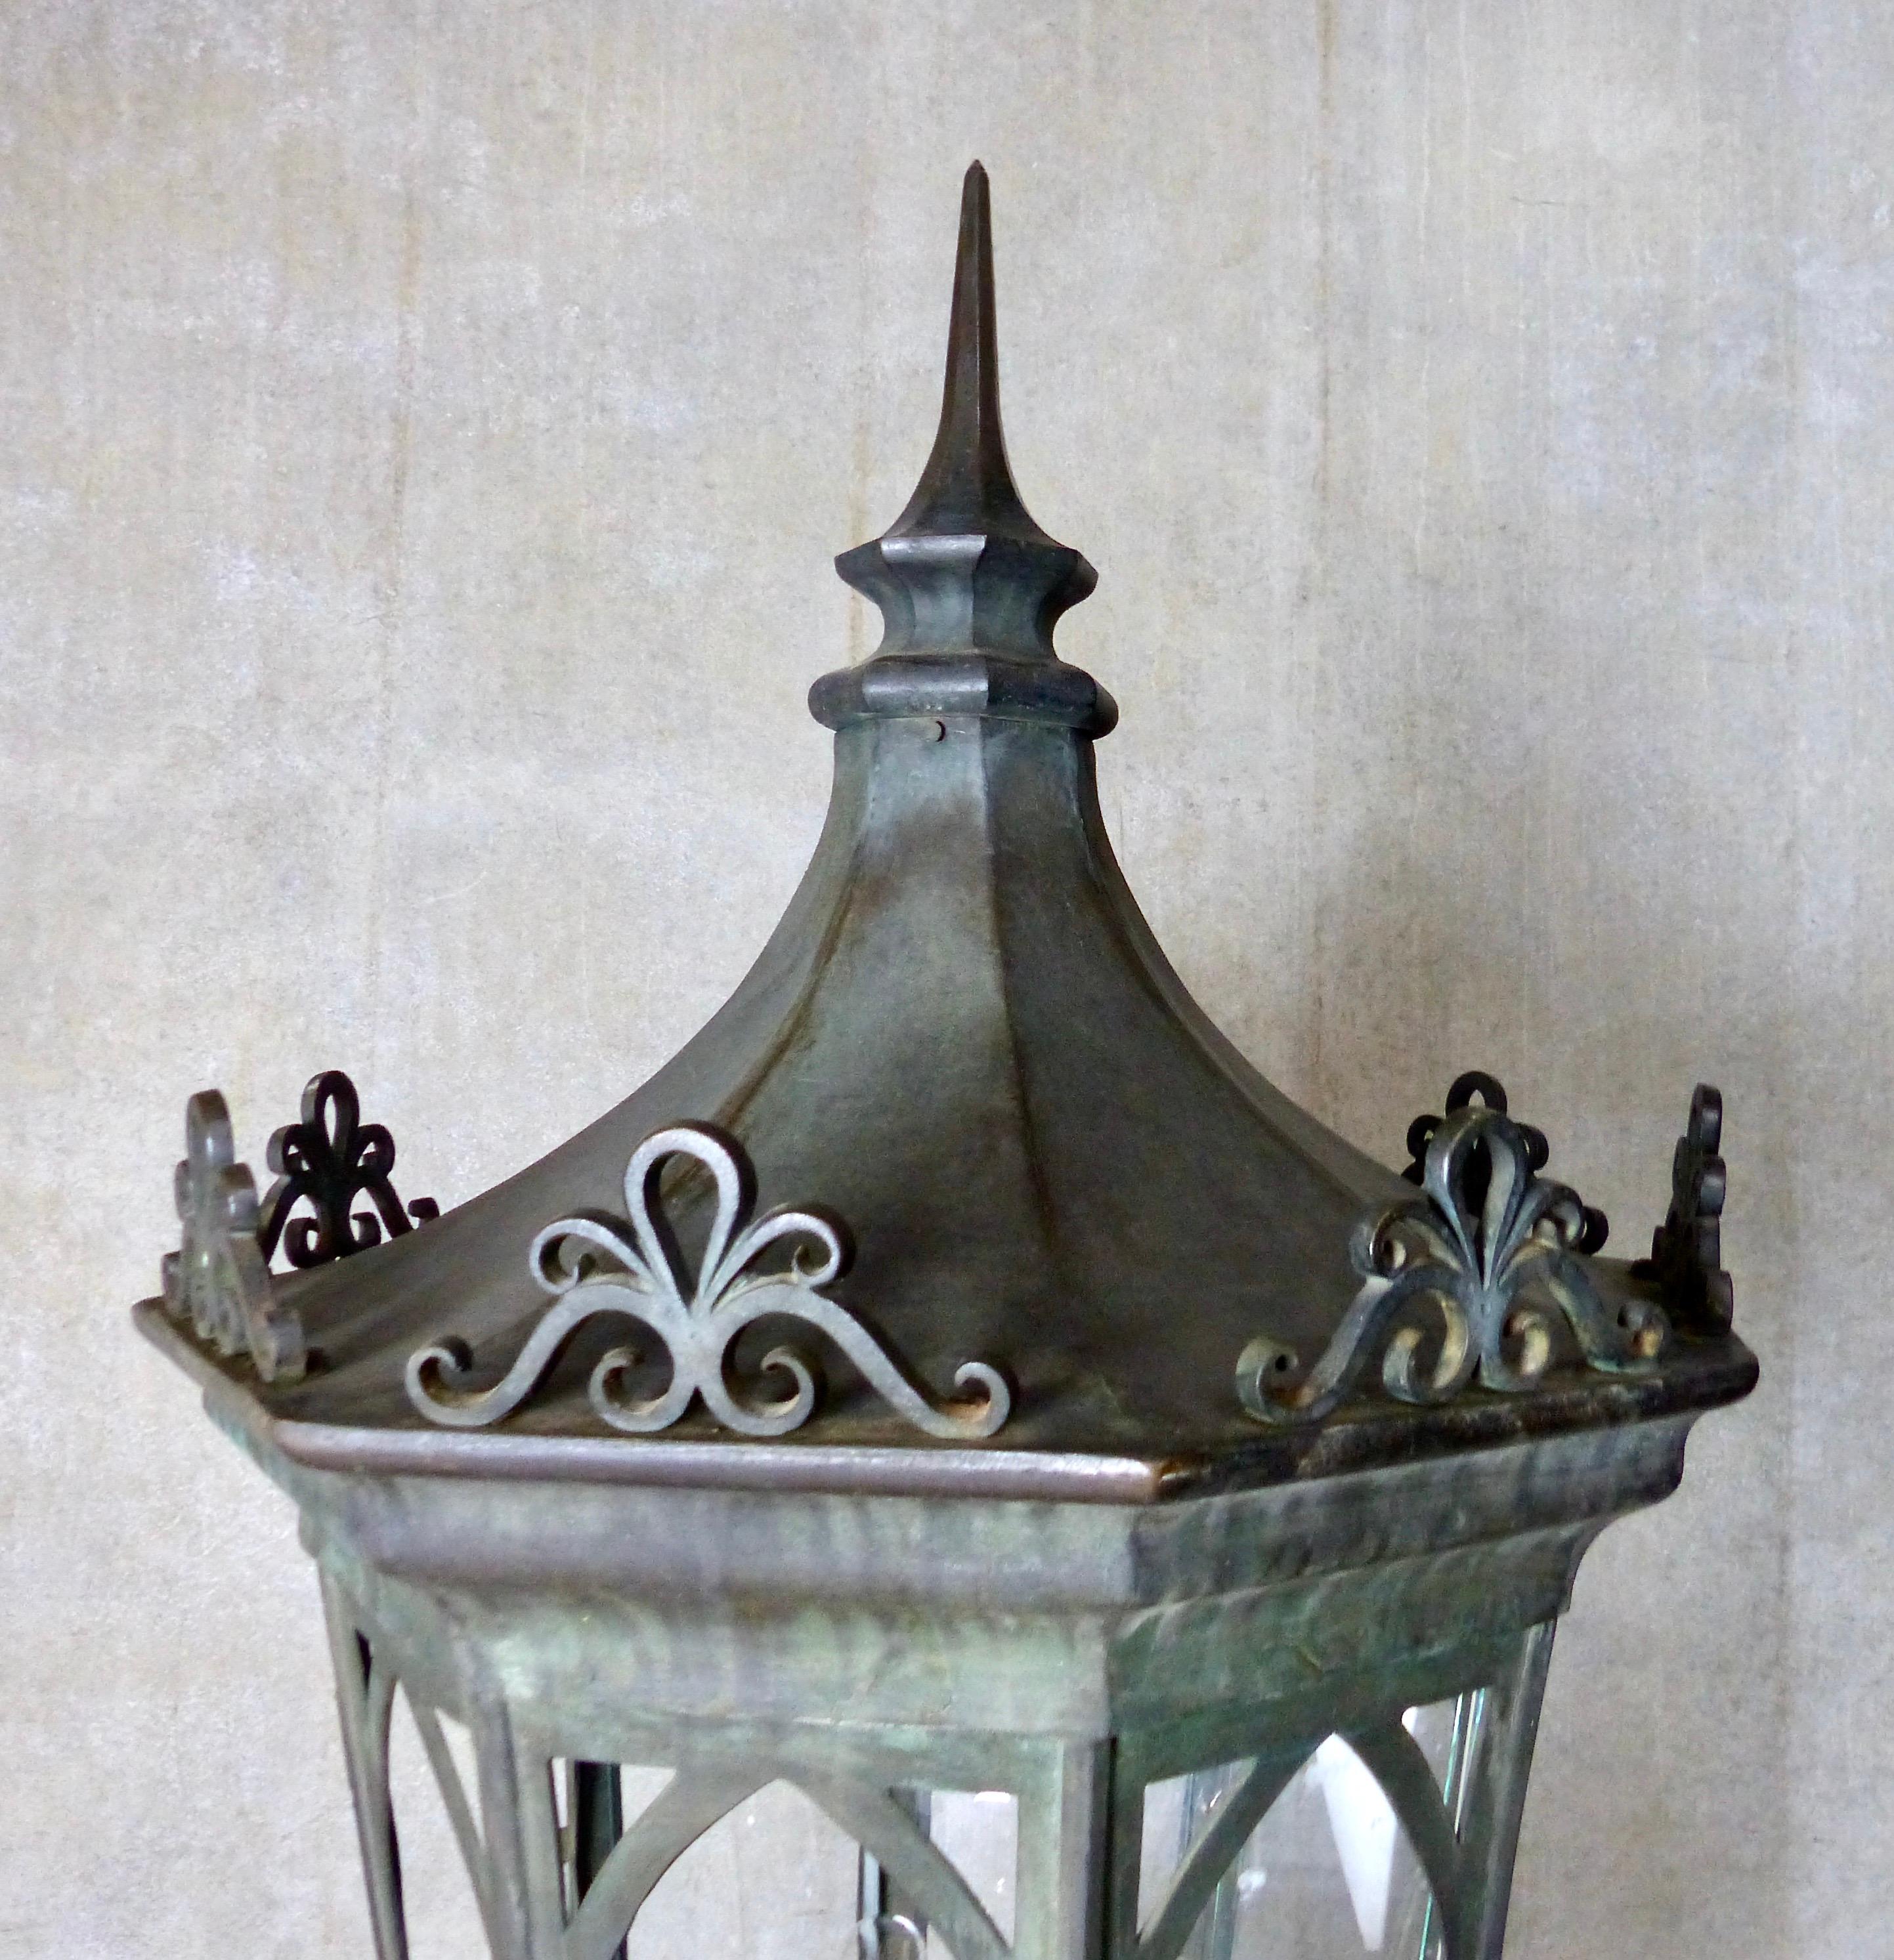 A bold and impressive antique cast bronze exterior lantern. Massive size and heft; octagonal shape. Truly a one-of-a-kind fixture. Believed to be from the Fairhaven Historical District in the Pacific Northwest. Re-wired and CSA approved to current